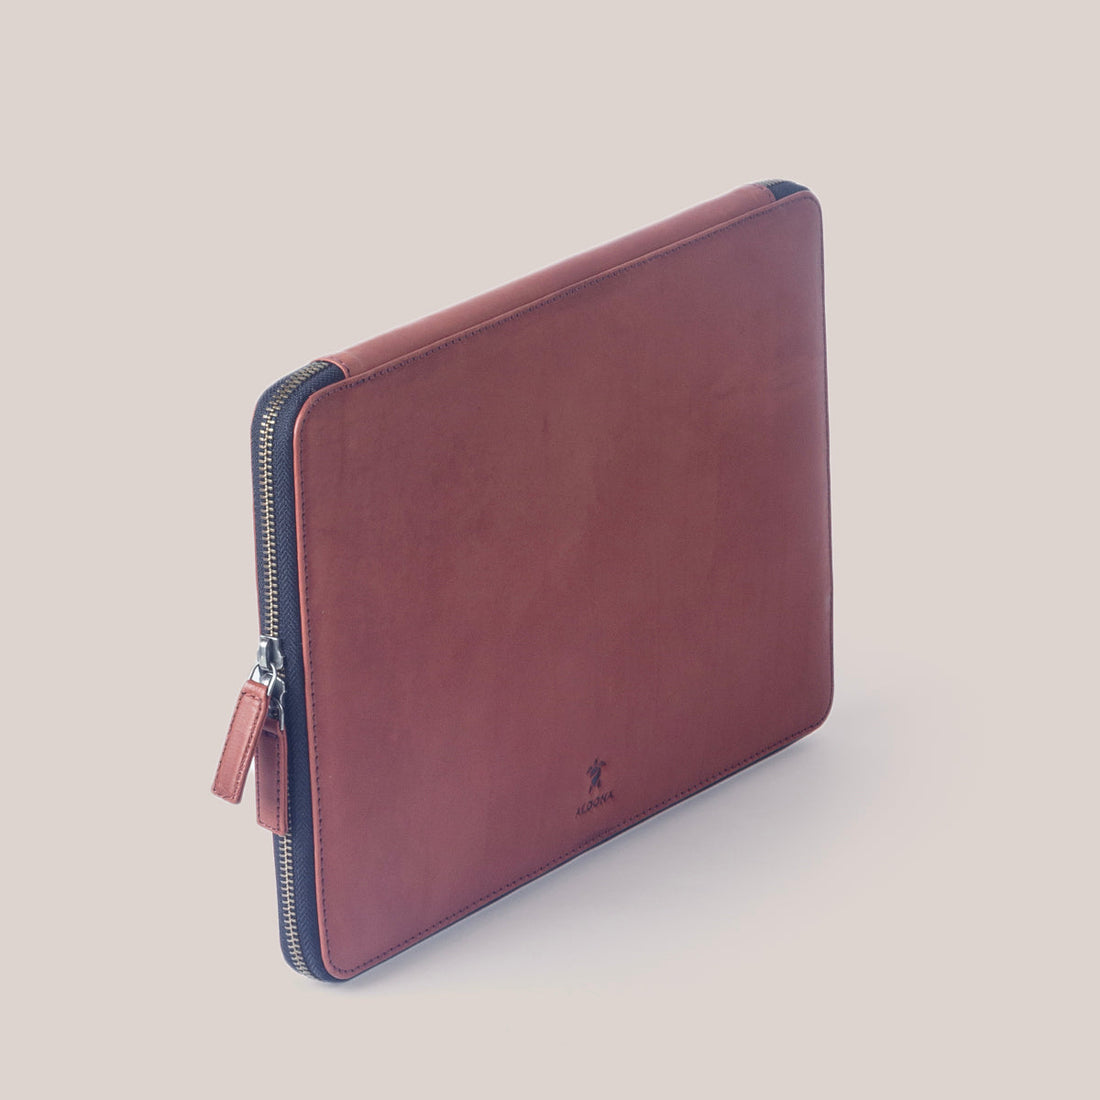 DELL XPS 15 Zippered Laptop Case - Burnt Tobacco